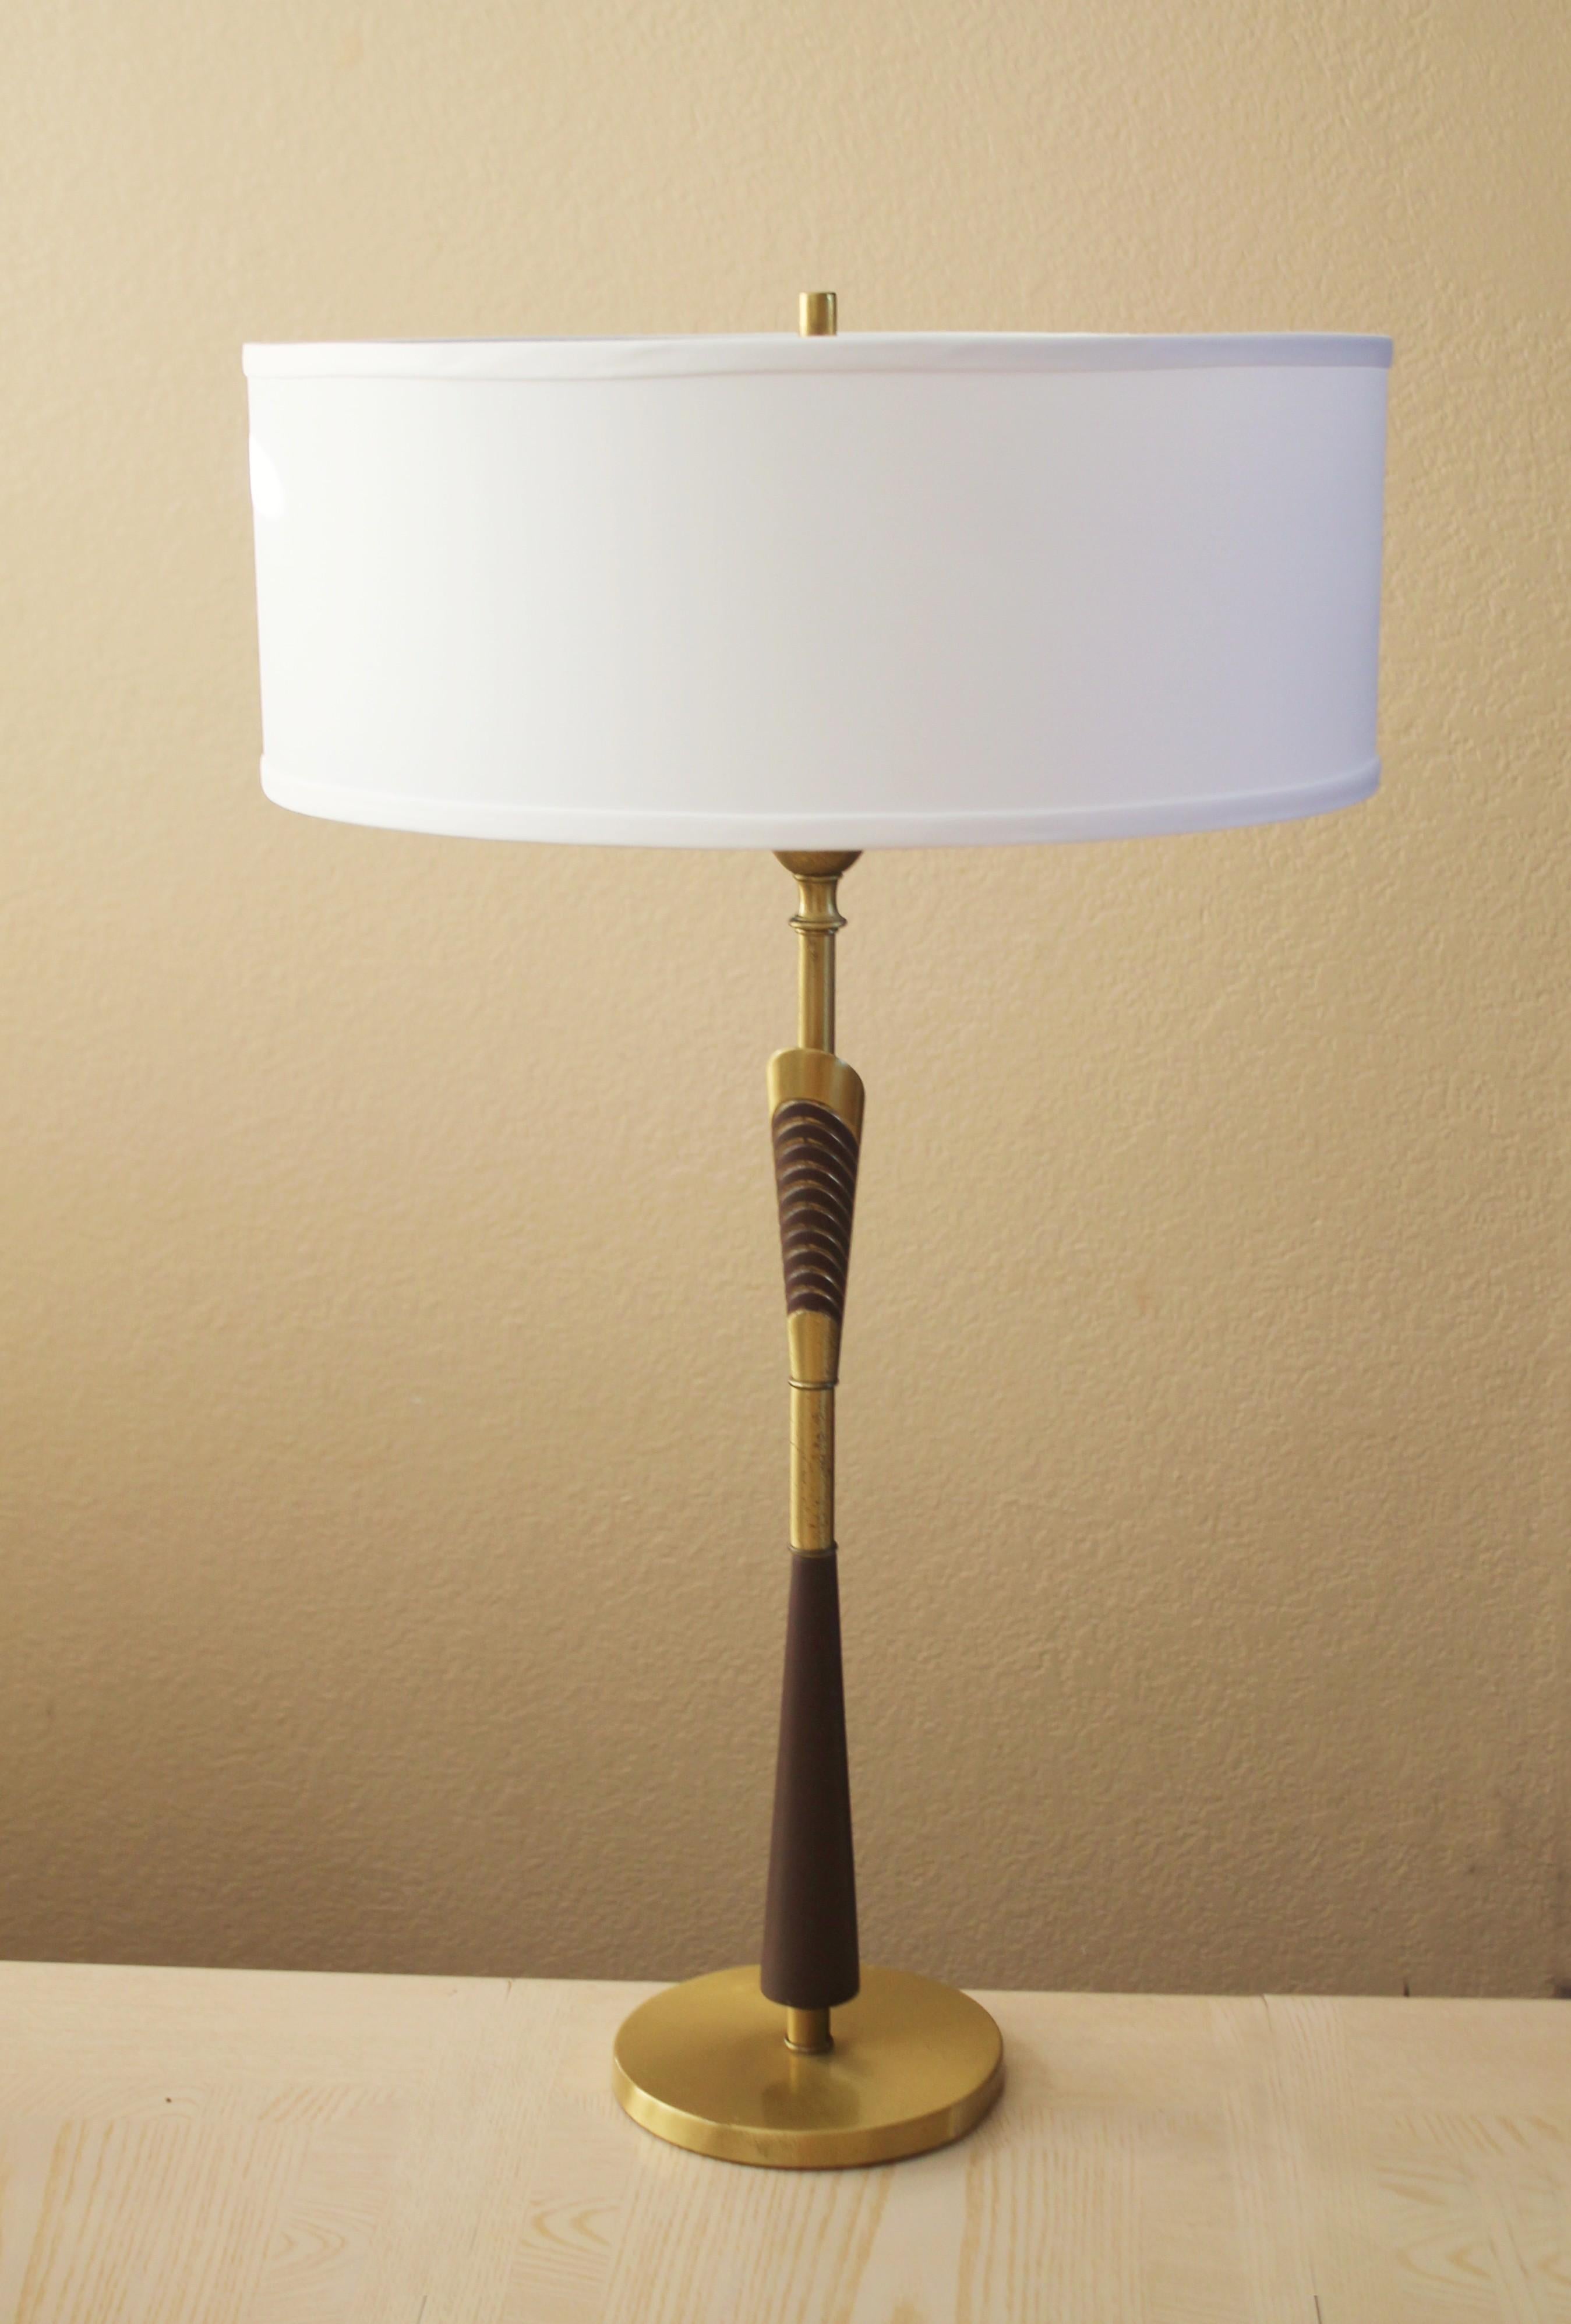 
RARE MARVELOUS MODERNISM!

REMBRANDT 
MID CENTURY MODERN
TABLE LAMP!

ATOMIC AWESOME!

DIMENSIONS: HEIGHT: 29